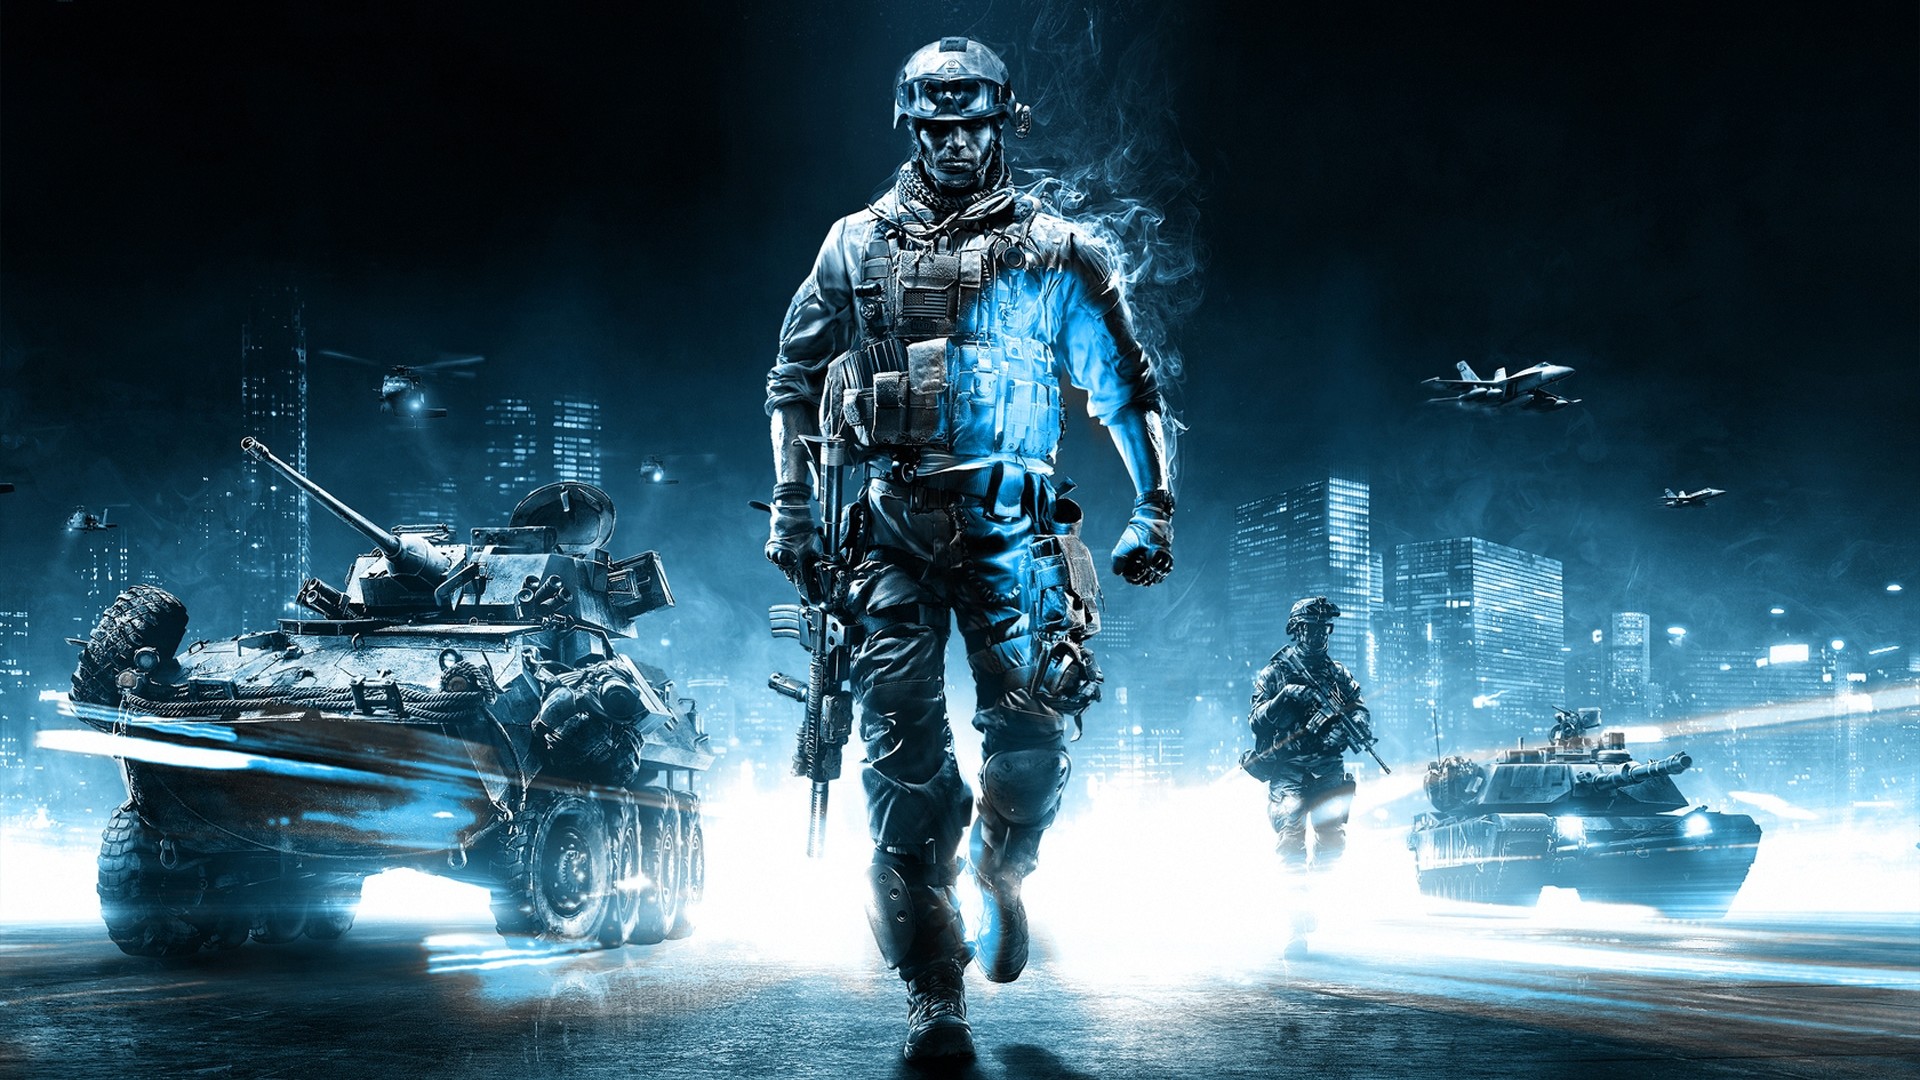 1920x1080 Battlefield 4 Awesome Wallpapers is one from many Best HD Wallpapers on  Games category in Amazing Wallpaperz.